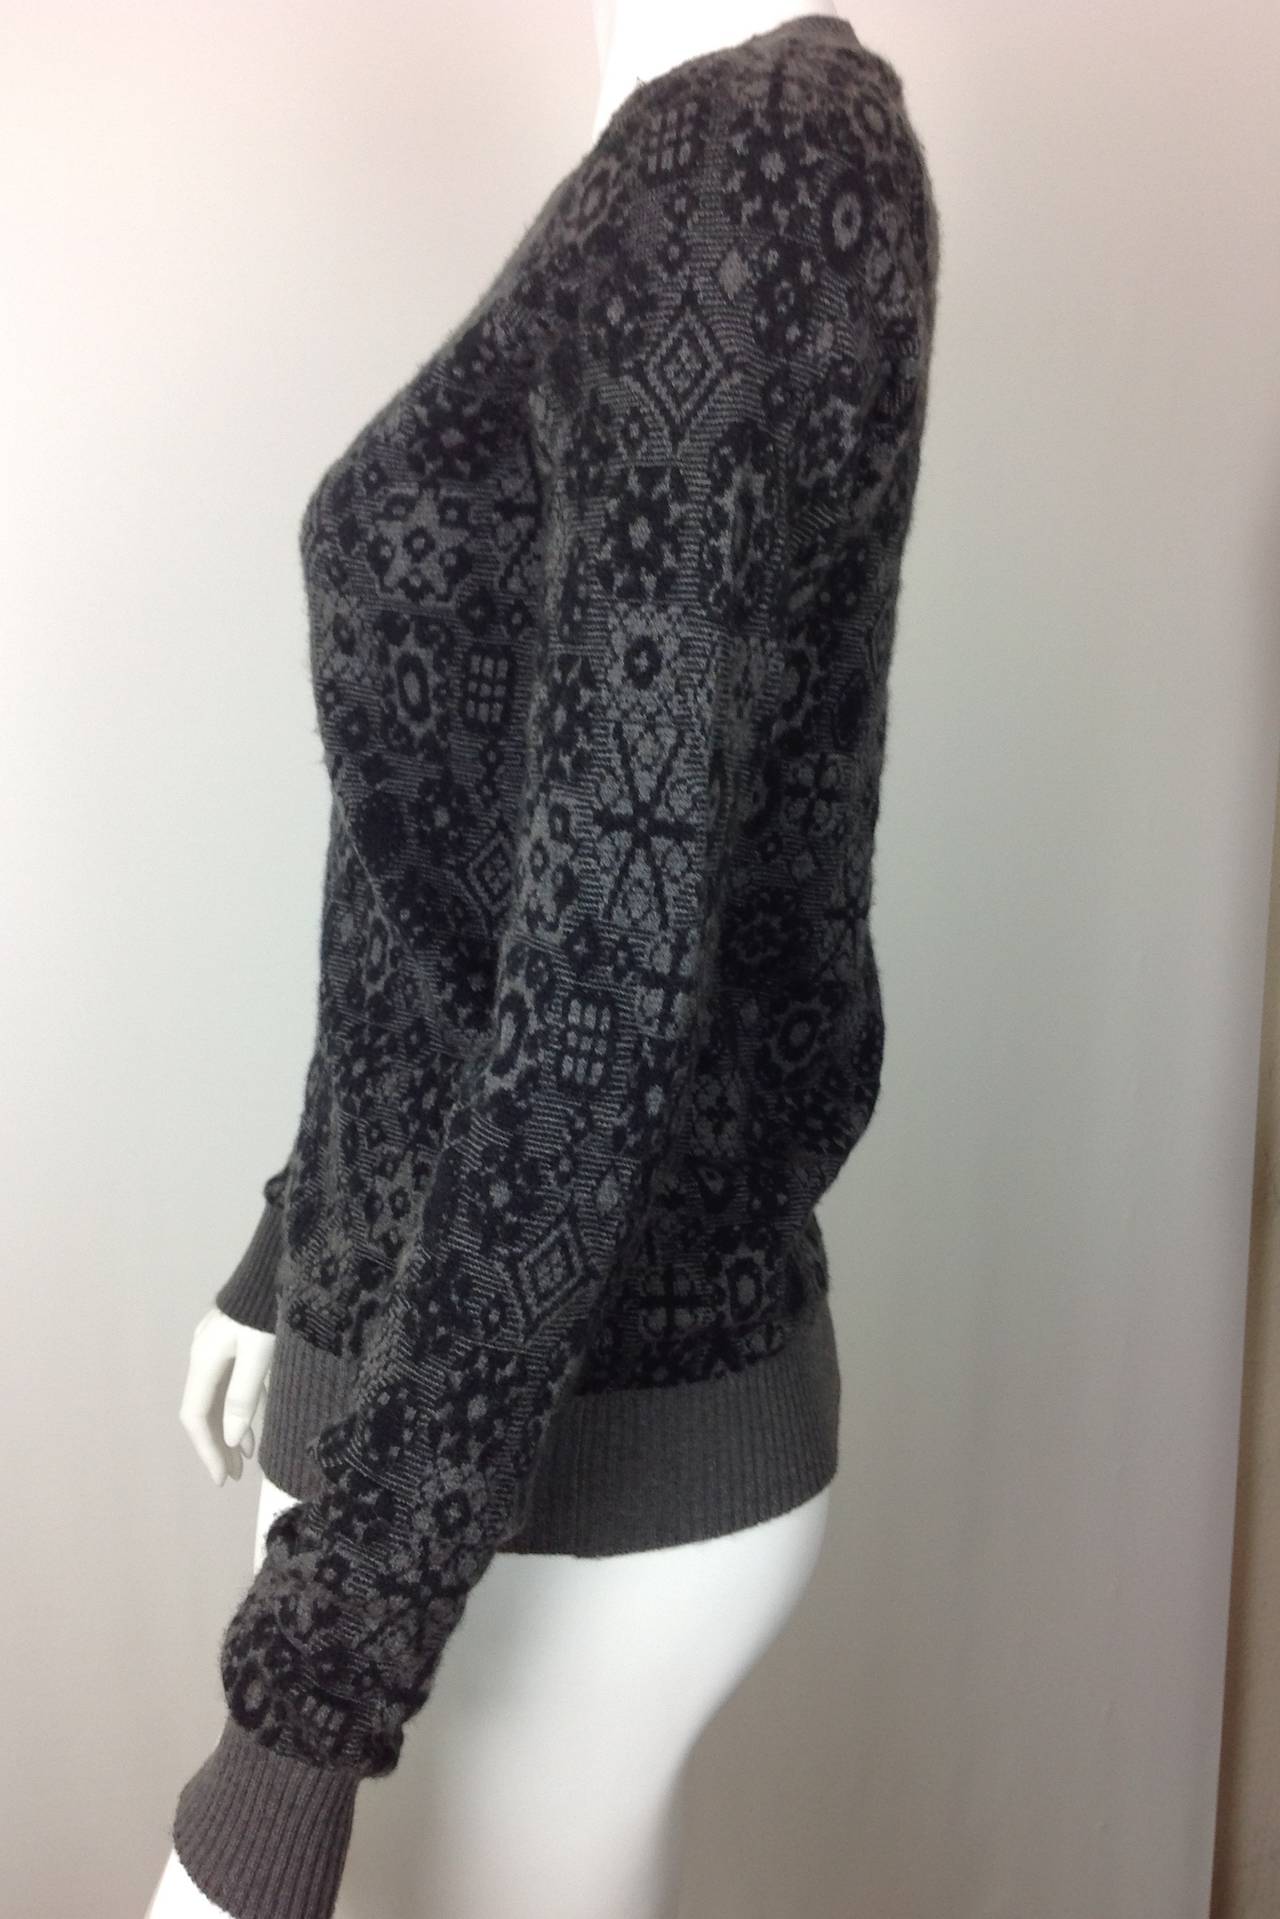 Chanel snowflake sweater in black and charcoal cashmere.  Crewneck pullover. 
Loose crewneck, cuffs and waist is ribbed cashmere in charcoal.
Classic great looks, wear it next to your body, or with a turtleneck or blouse underneath for additional